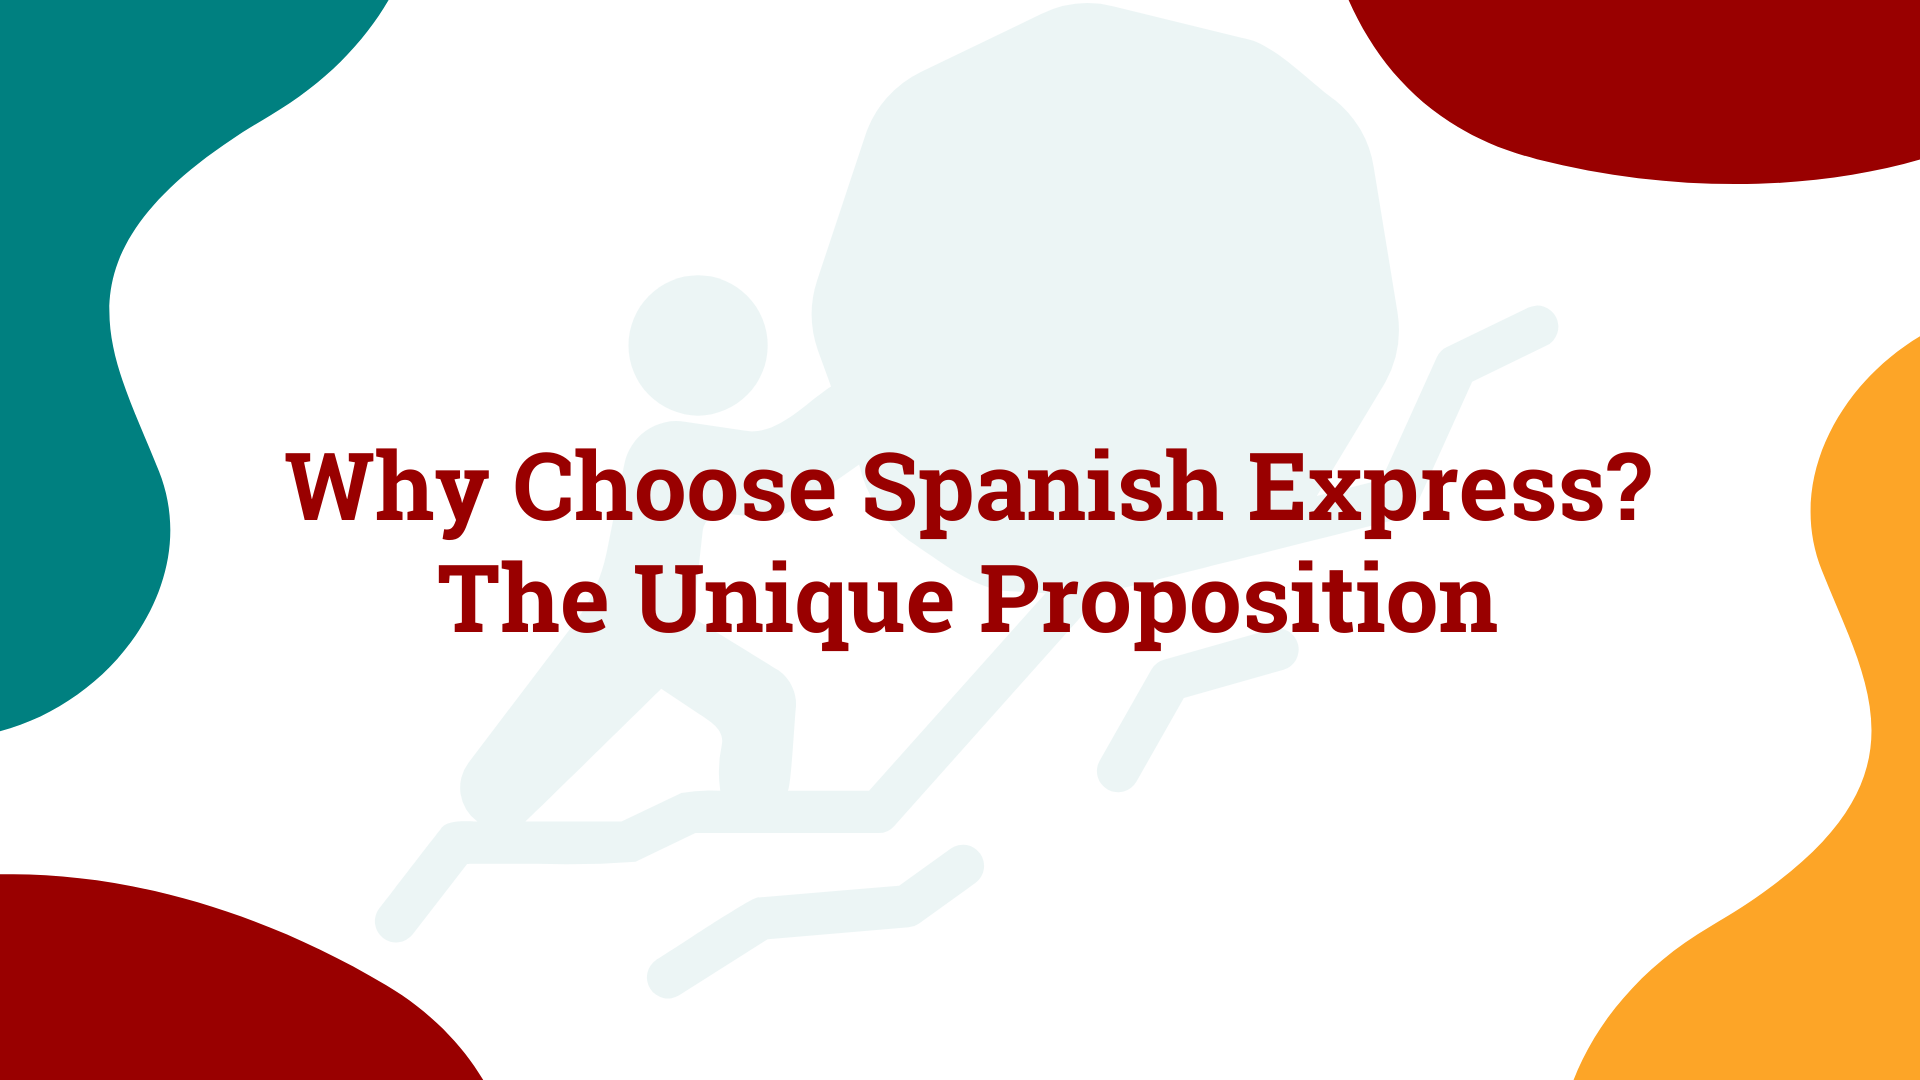 Why Choose Spanish Express?